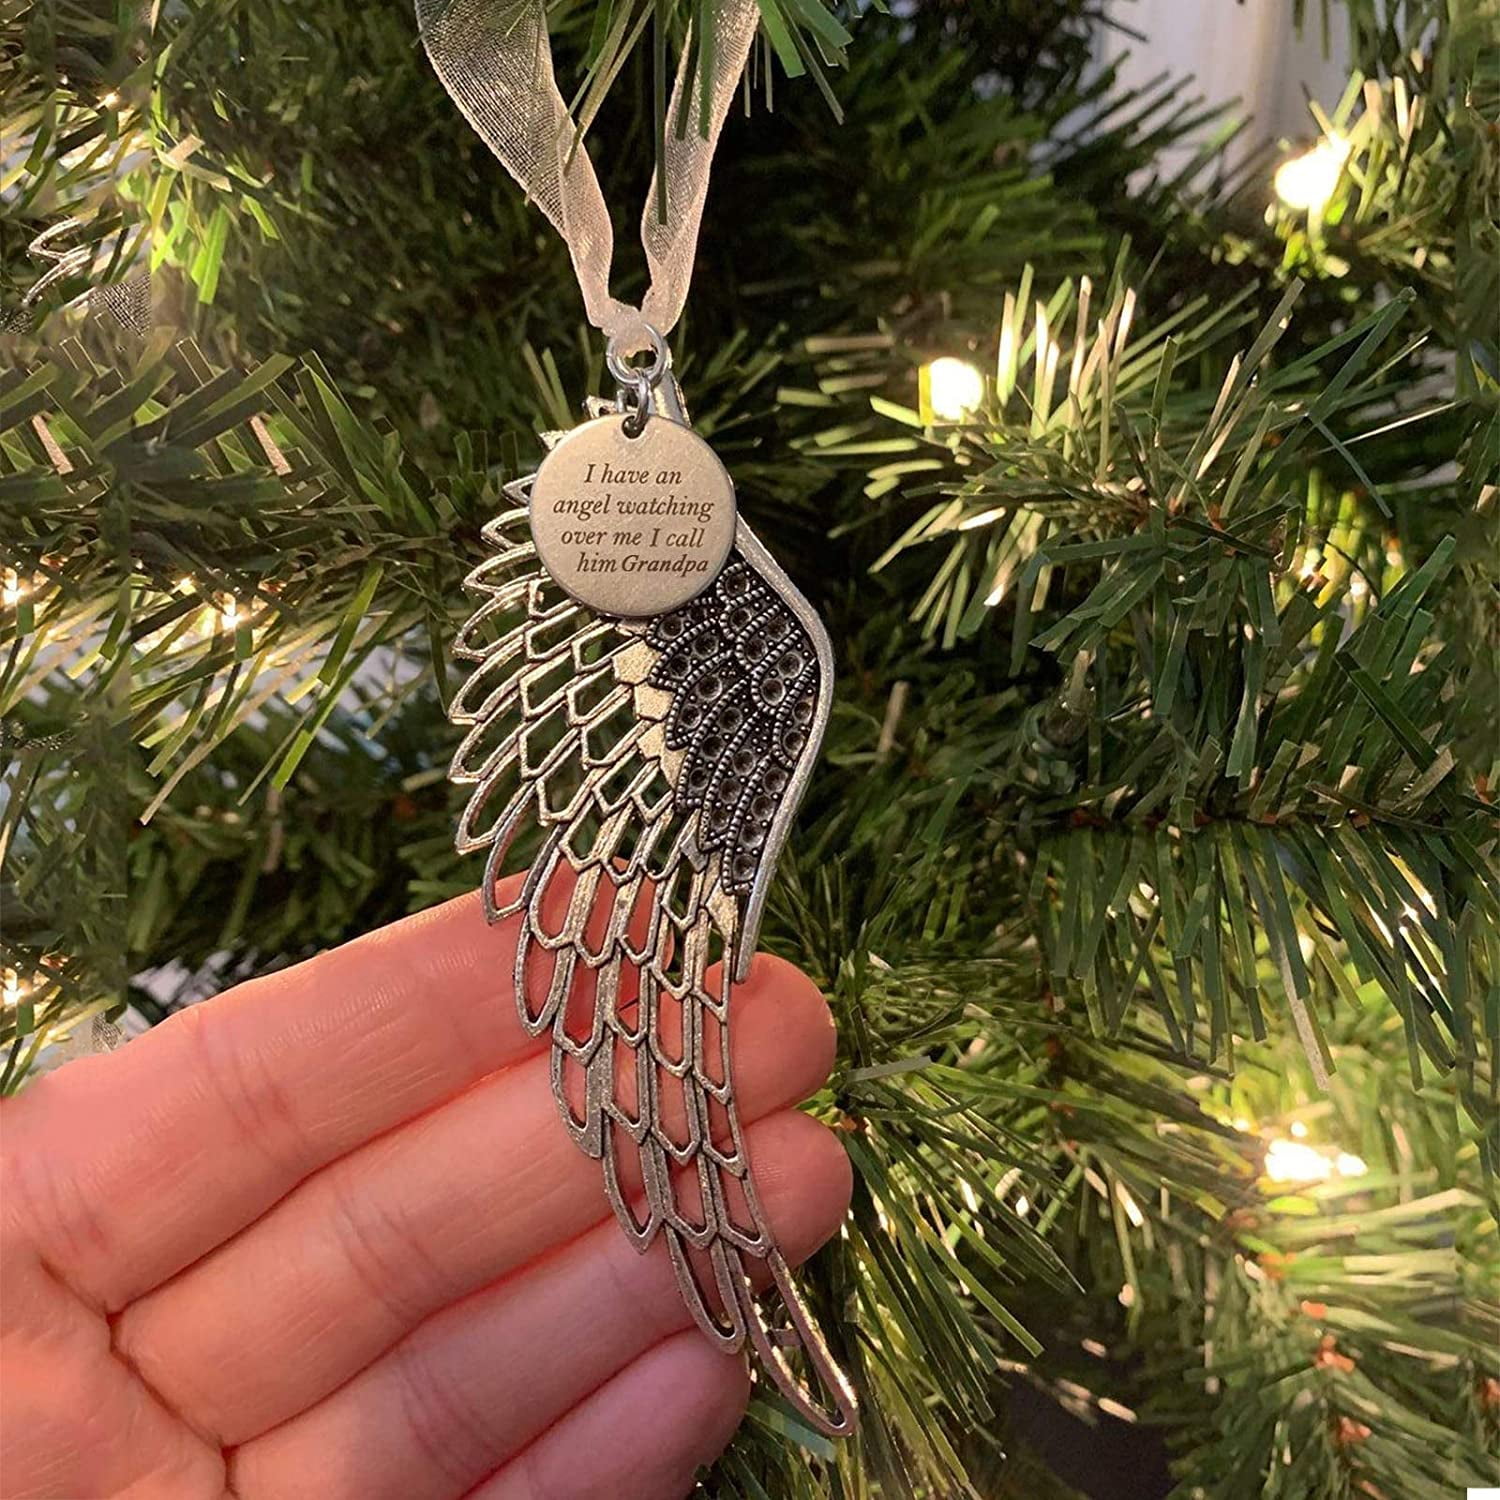 Loss of Father Sympathy Ornament Dated Christmas 2020 Condolence Gift Idea Dads Gold Angel Wings Death Anniversary Remembrance Memorial Family Friends Keepsake Tree Decorations 3 Flat Circle Ceramic